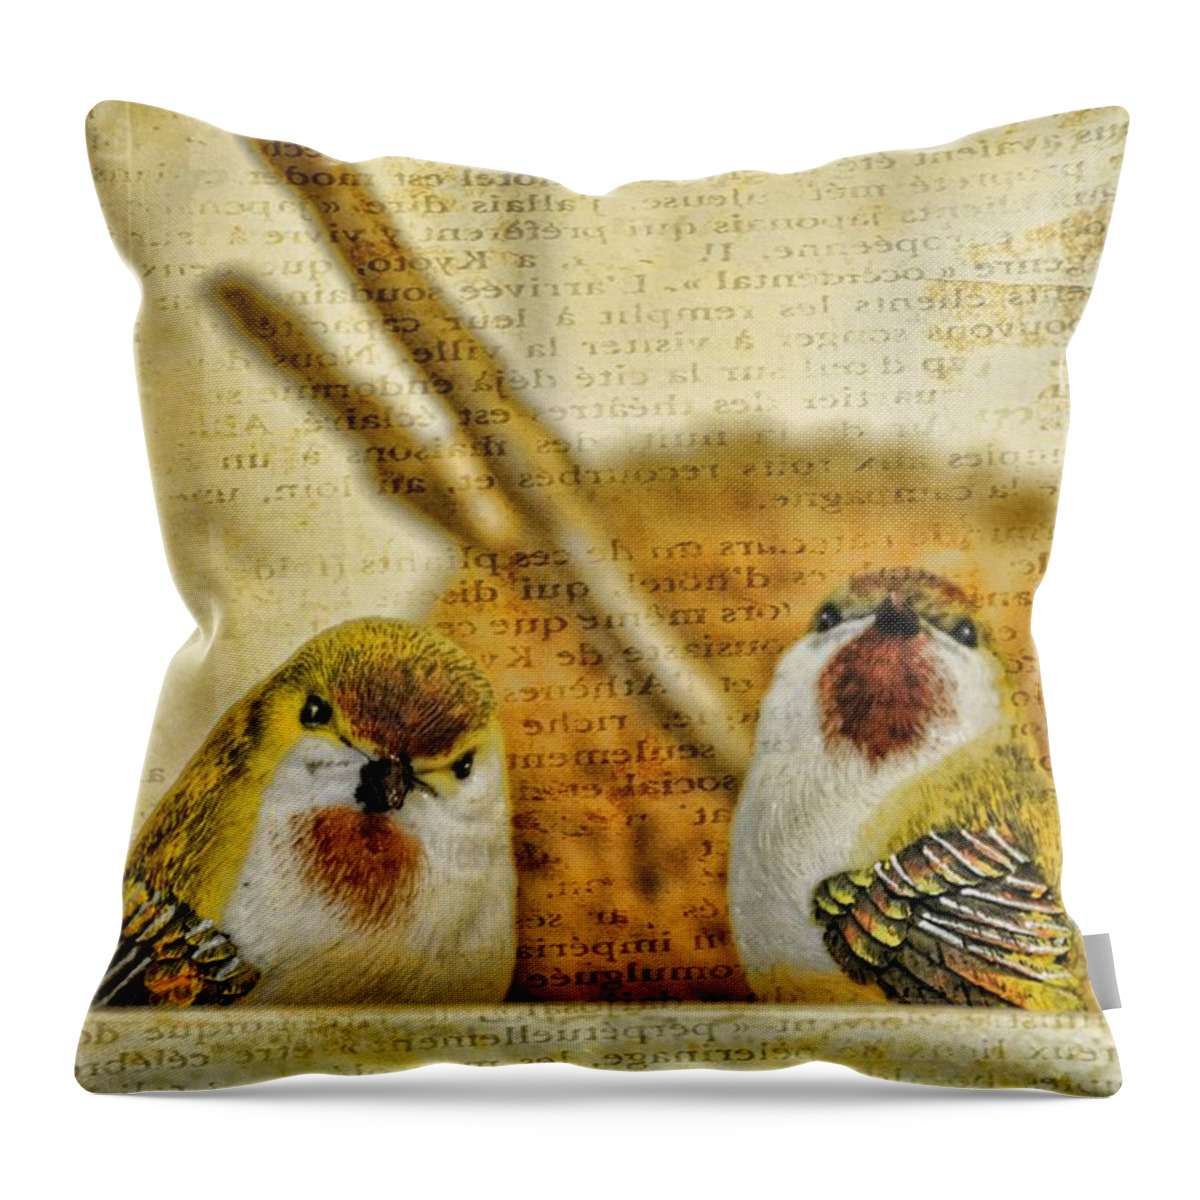 Birds Throw Pillow featuring the photograph Two Little Birds by Jan Amiss Photography